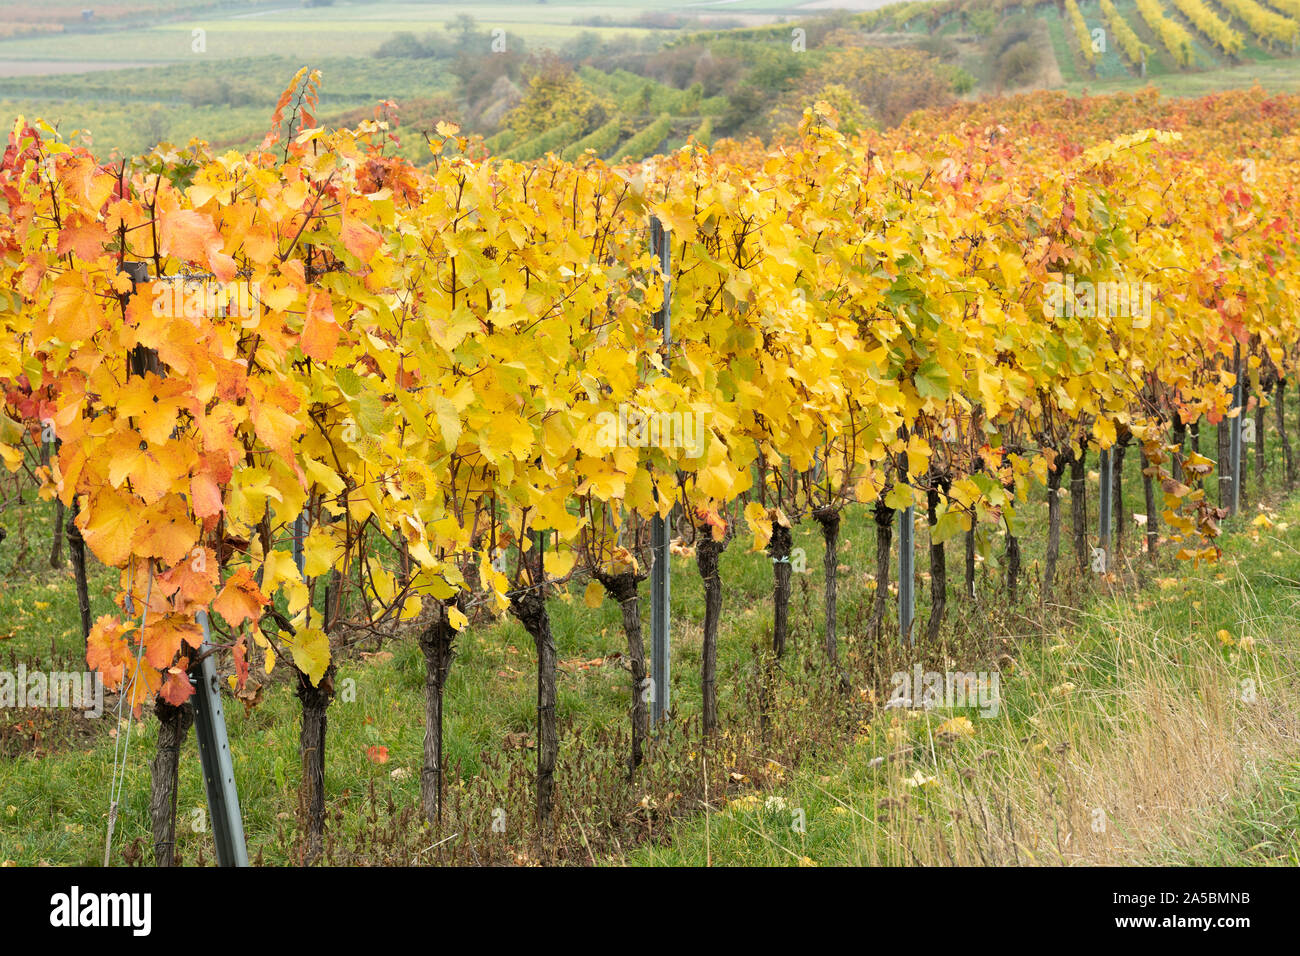 A row of orange and yellow leaved European grapevines (Vitis vinifera) growing in a vineyard in the Kamptal wine producing area of Lower Austria Stock Photo